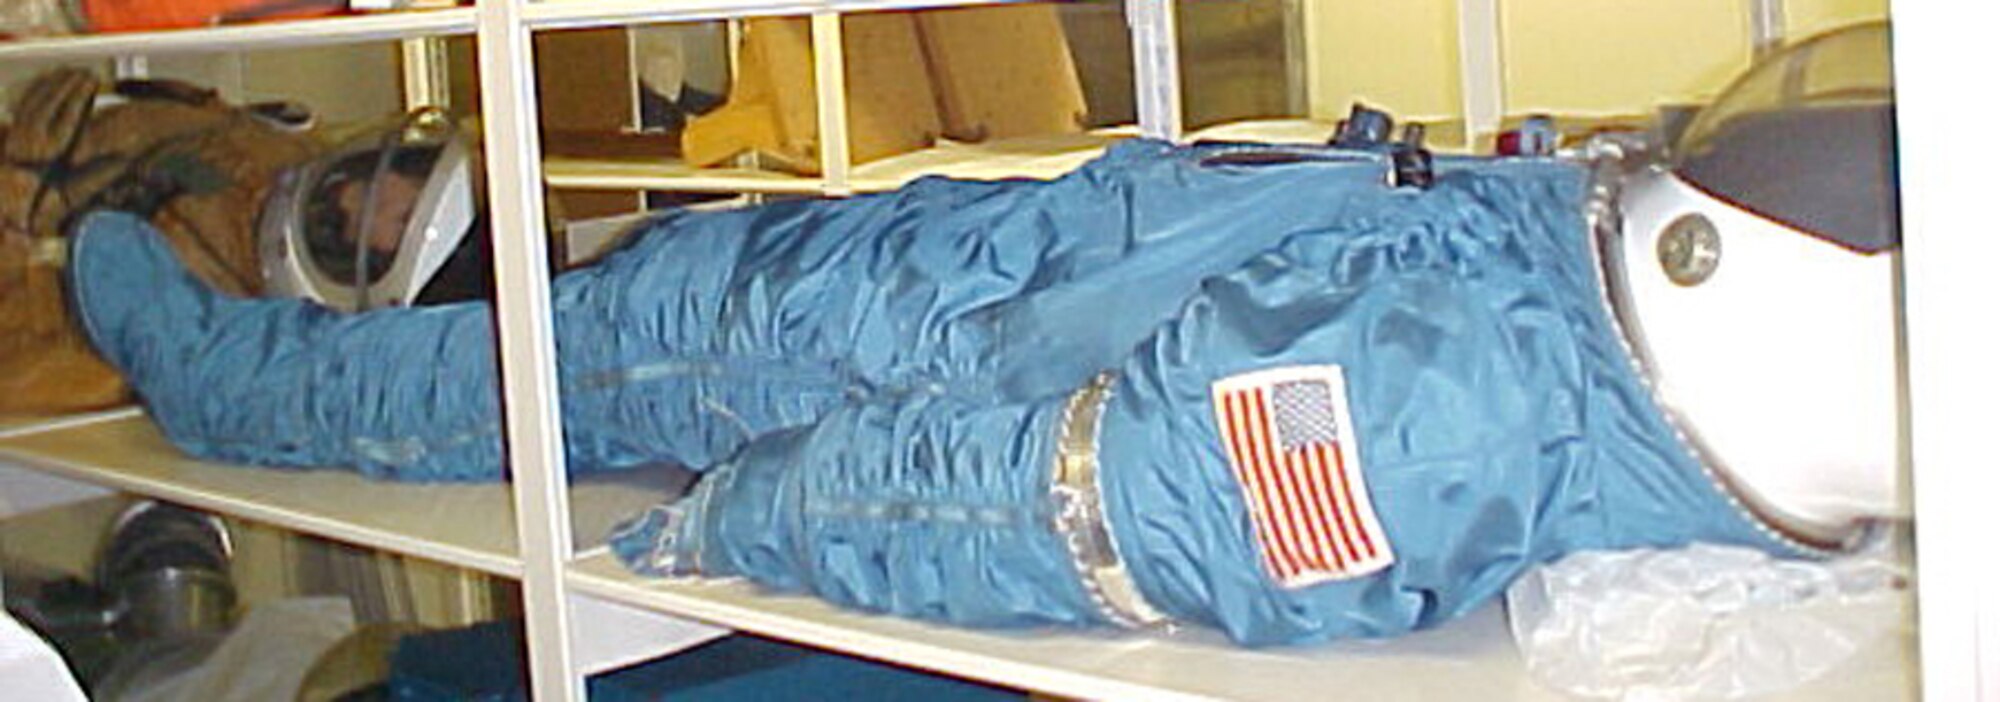 This model MH-7 training suit, produced by United Aircraft's Hamilton Standard Division, was a durable, cost-effective tool for preparing USAF astronauts for Manned Orbiting Laboratory missions in more advanced suits. MOL was to use USAF-modified NASA Gemini spacecraft to put two crewmen in a space station for up to a month. (U.S. Air Force photo)